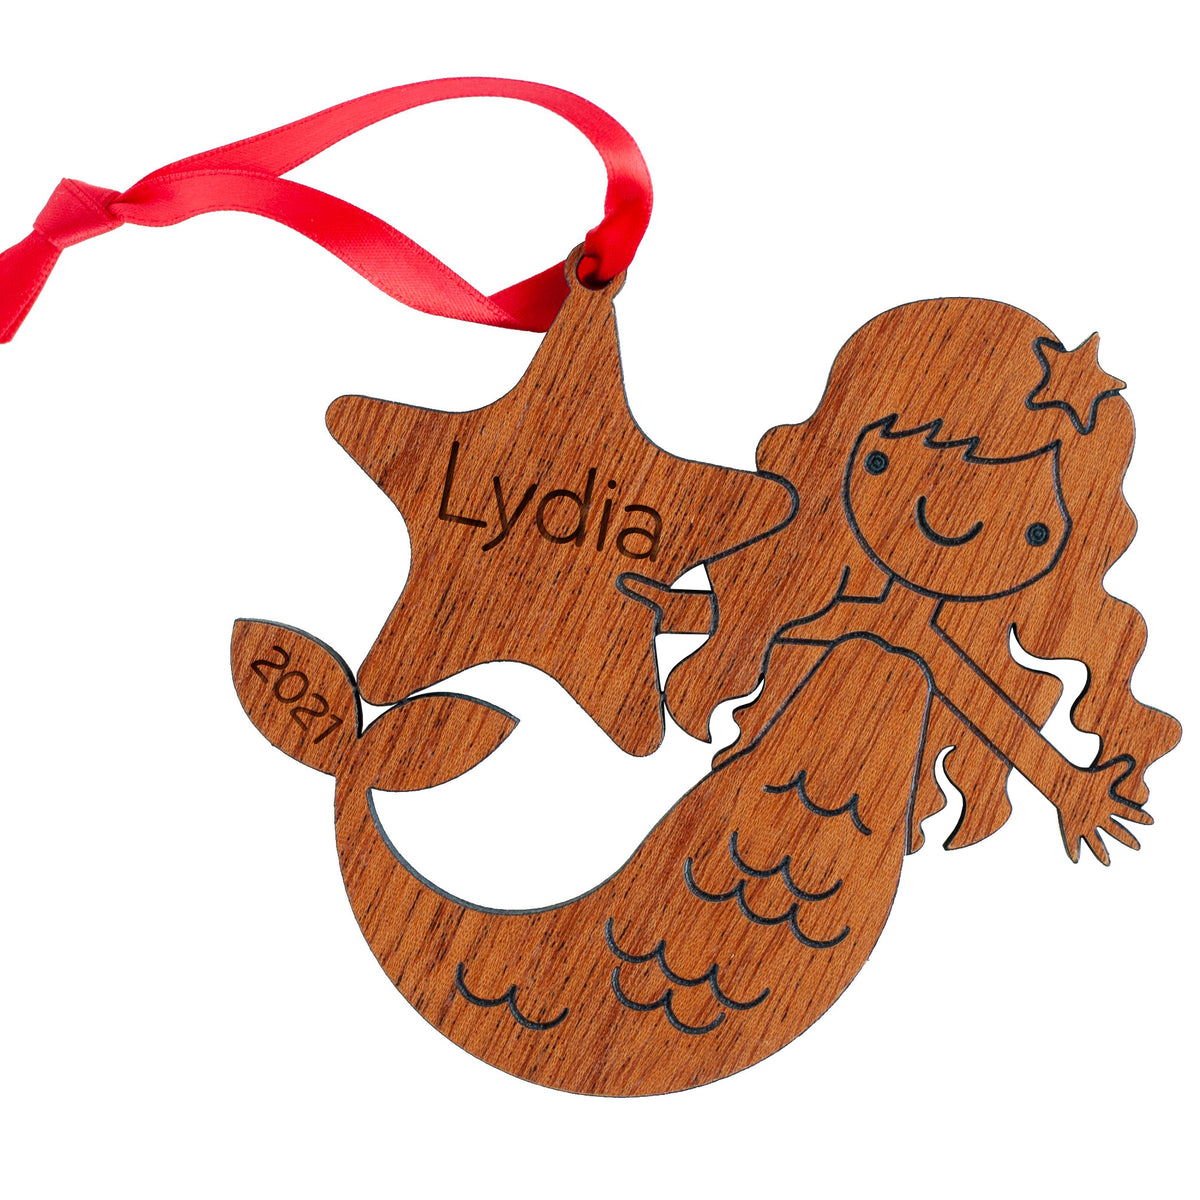 Mermaid Wooden Christmas Ornament - Personalized